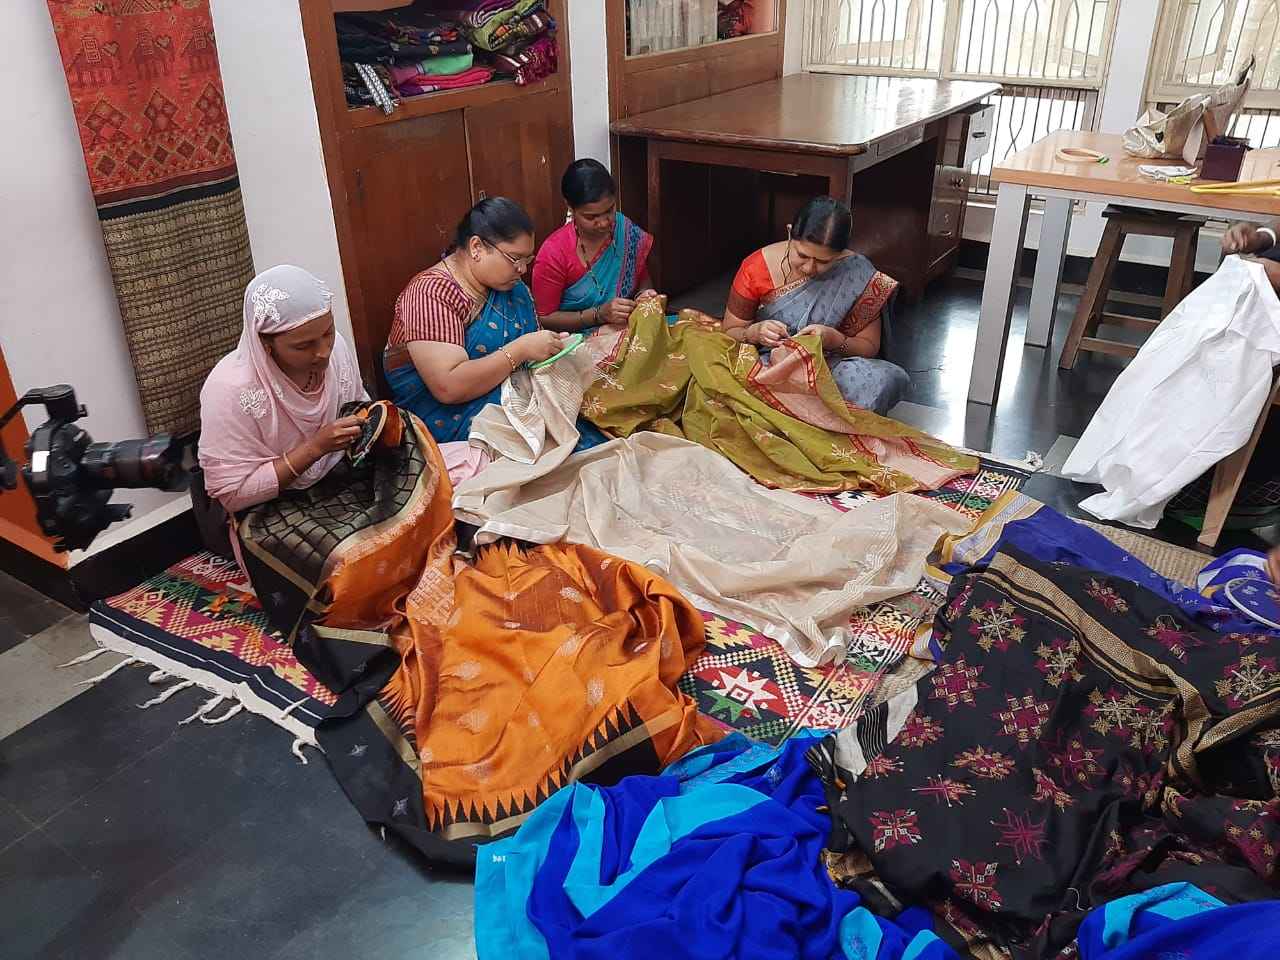 he artisans of Artikrafts engaged in kasuti embroidery